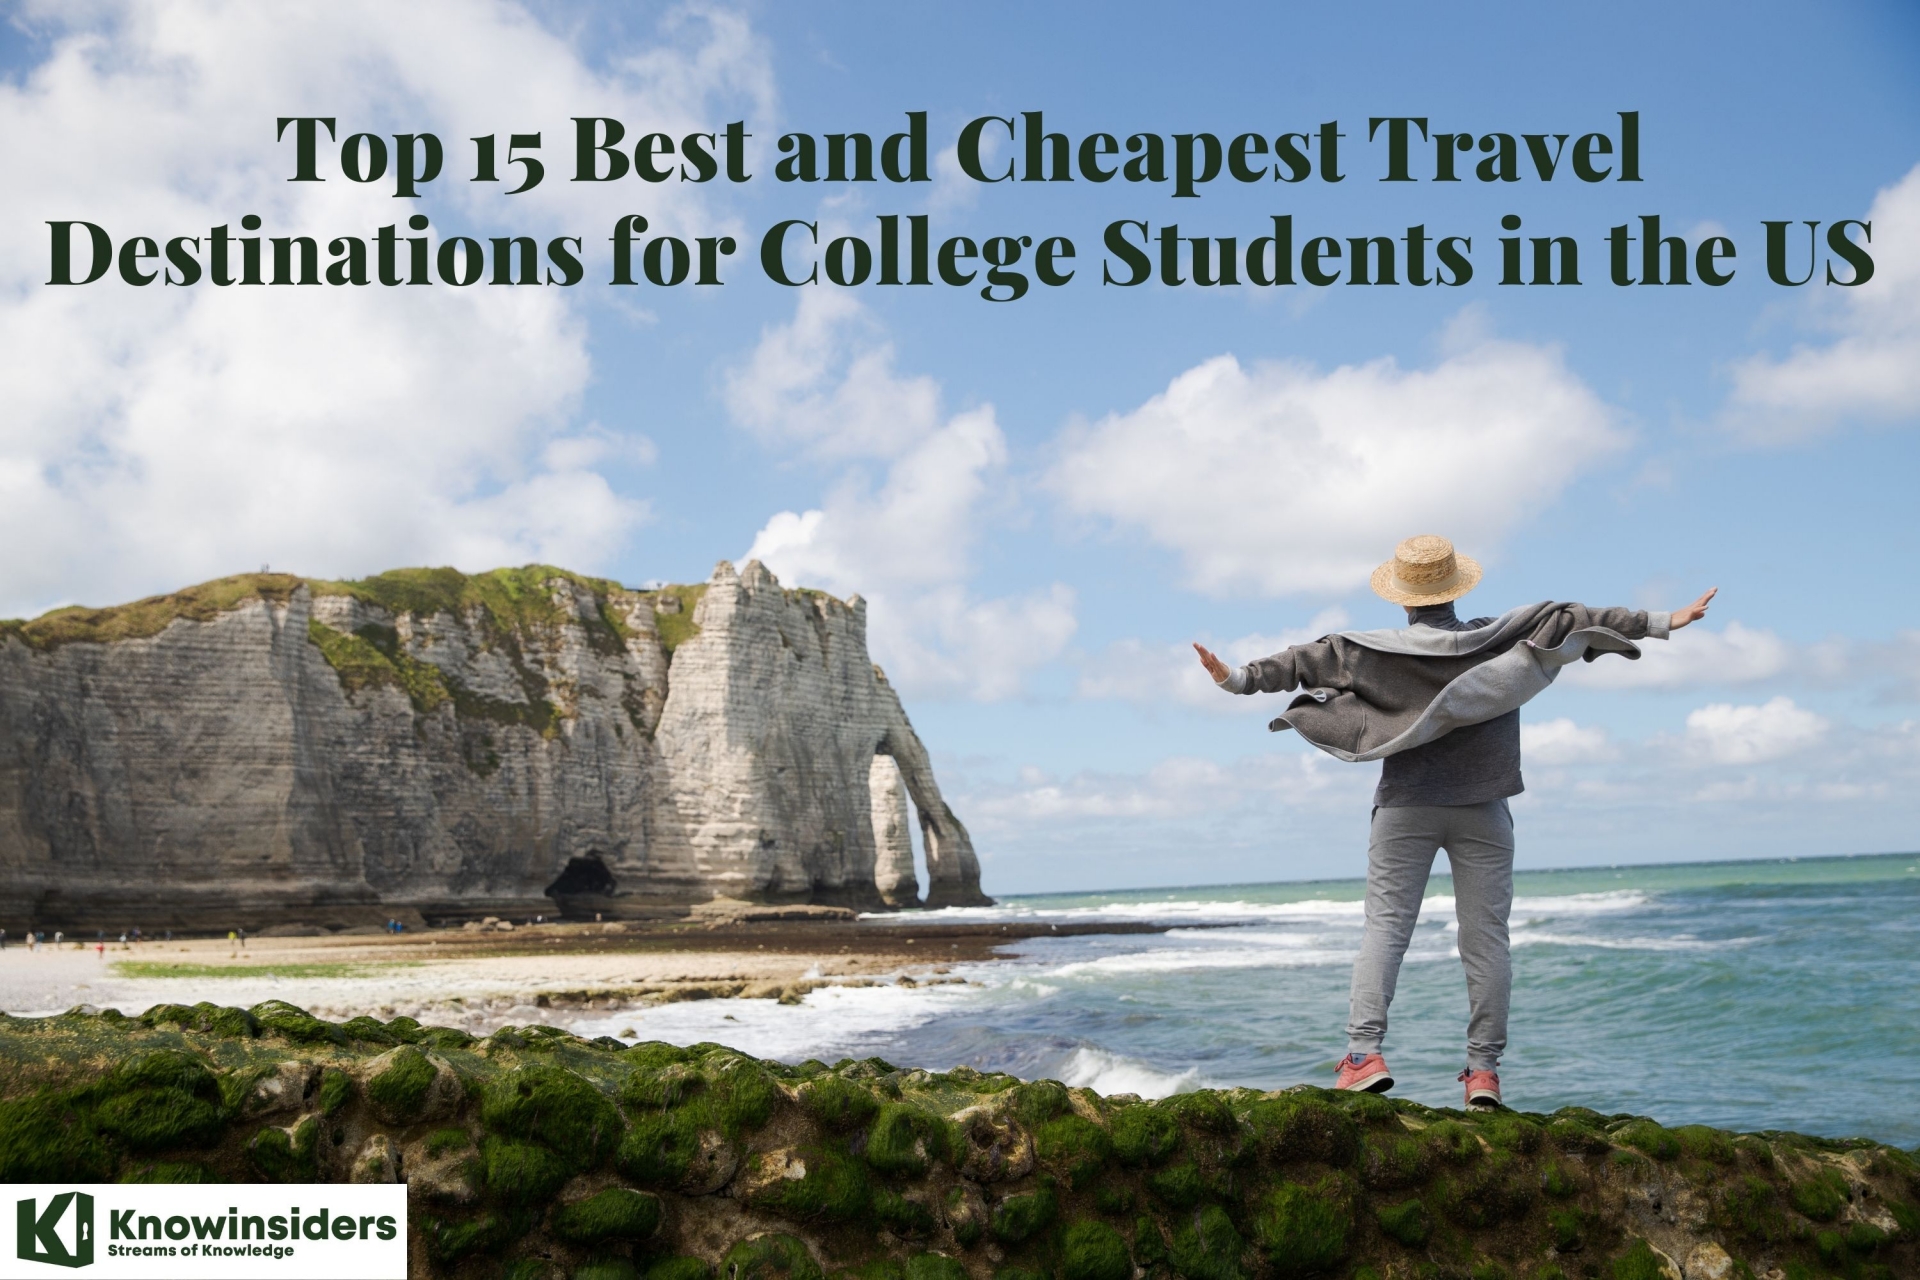 Top 13 Best and Cheapest Travel Destinations for U.S College